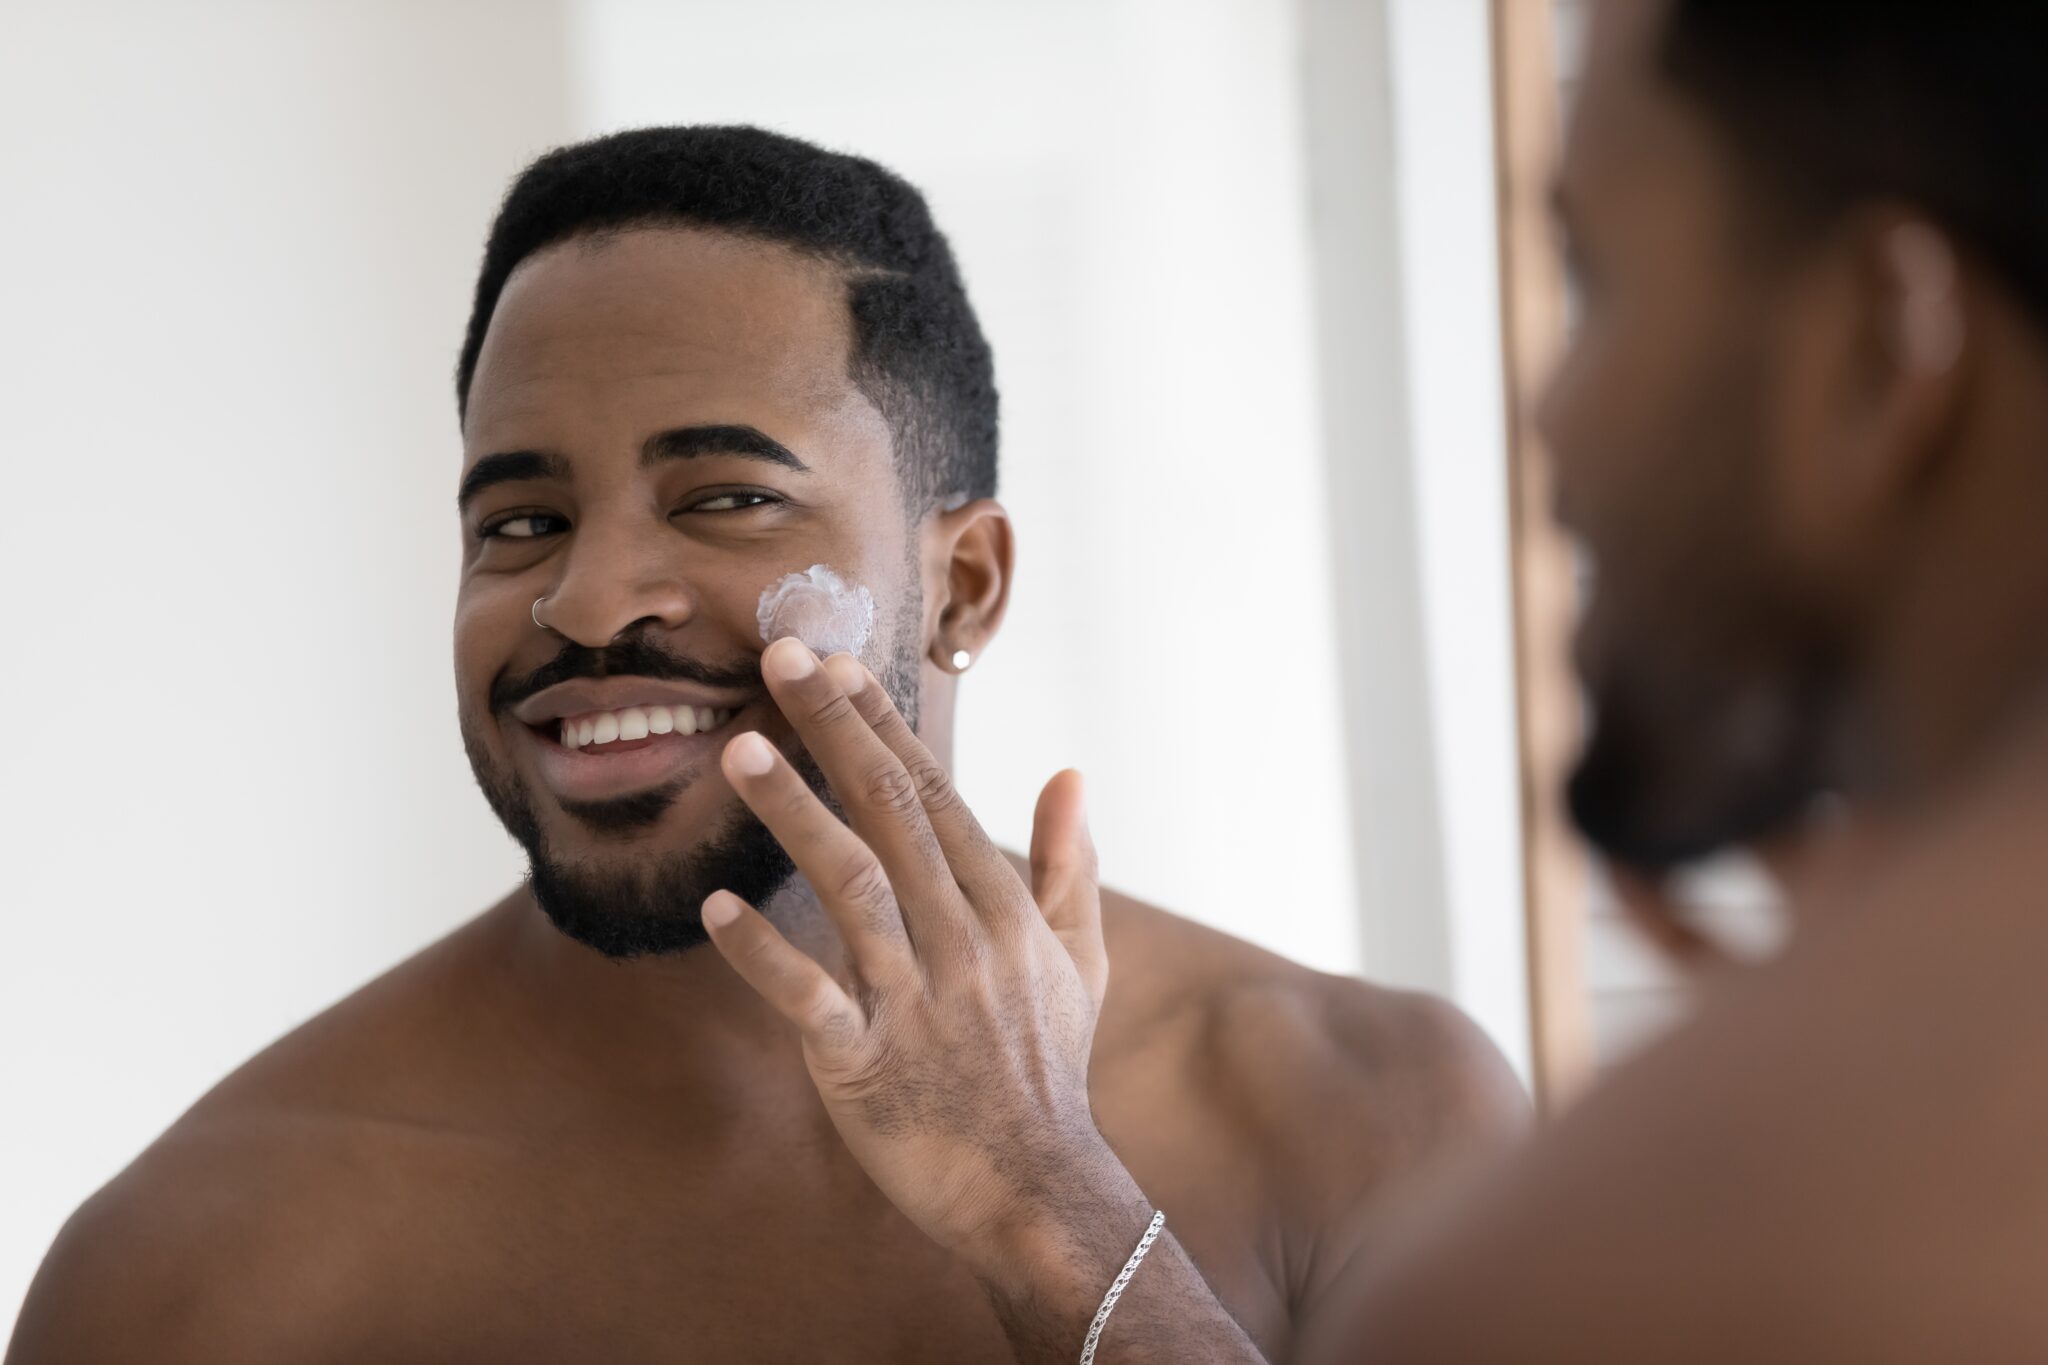 Young,Smiling,African,Man,Reflect,In,Mirror,Apply,Cleanse,Products